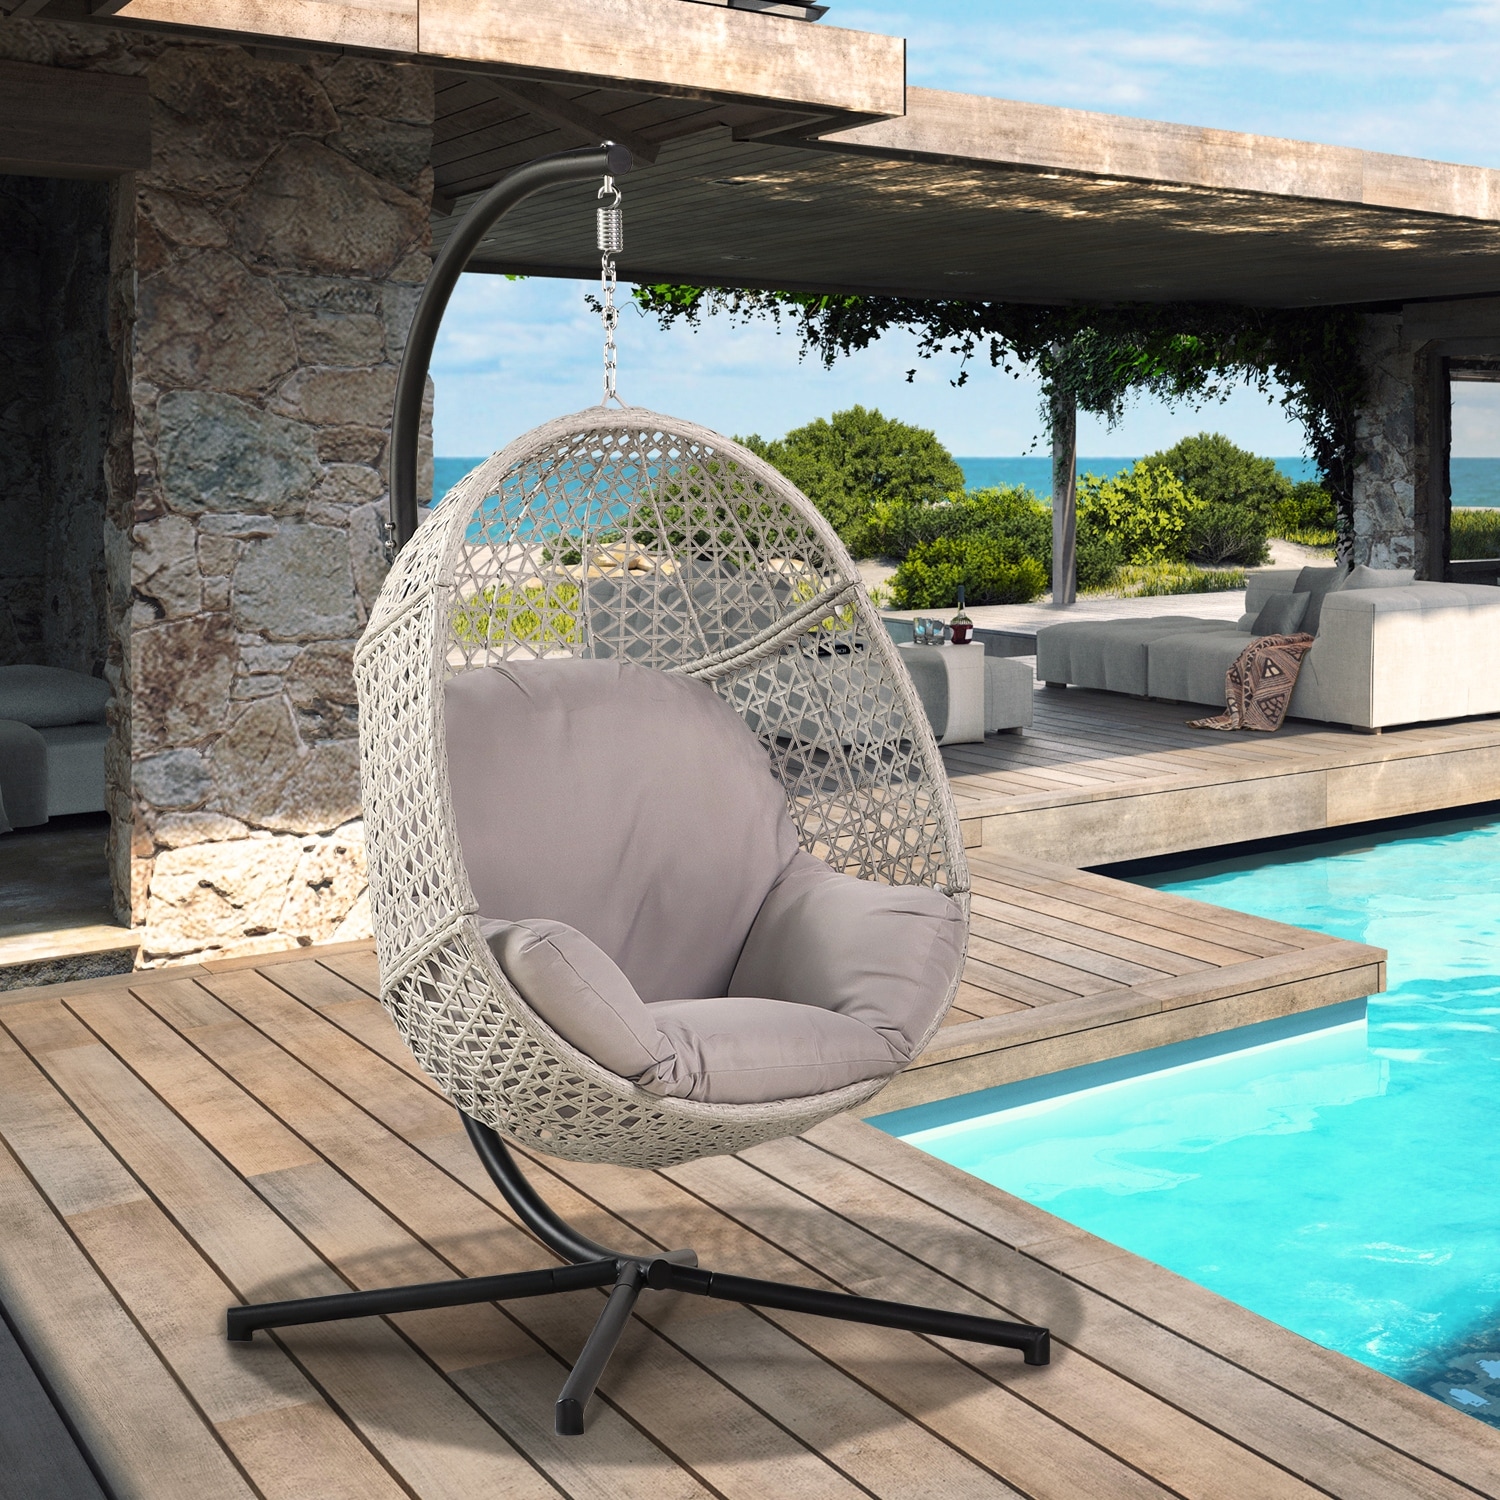 https://ak1.ostkcdn.com/images/products/is/images/direct/7341e81446f0bc65a6126d9c9c3d79115e0802e0/Large-Hanging-Egg-Chair-with-Stand-%26-UV-Resistant-Cushion-Hammock-Chairs-with-C-Stand-for-Outdoor.jpg